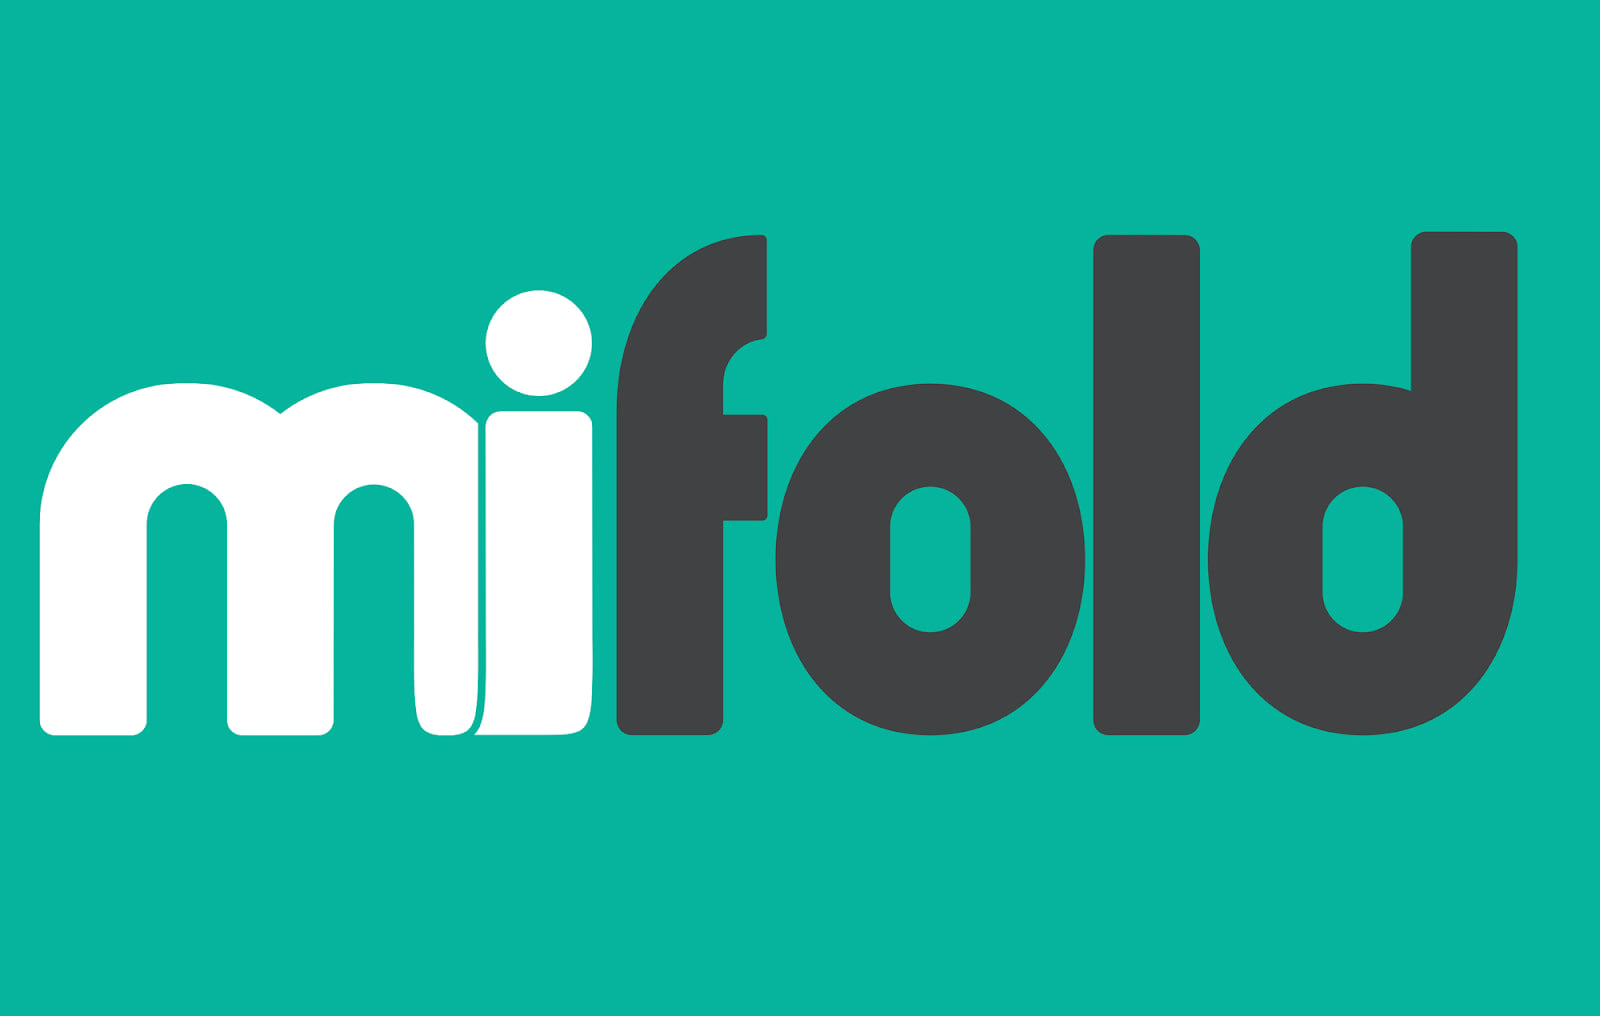 About Mifold